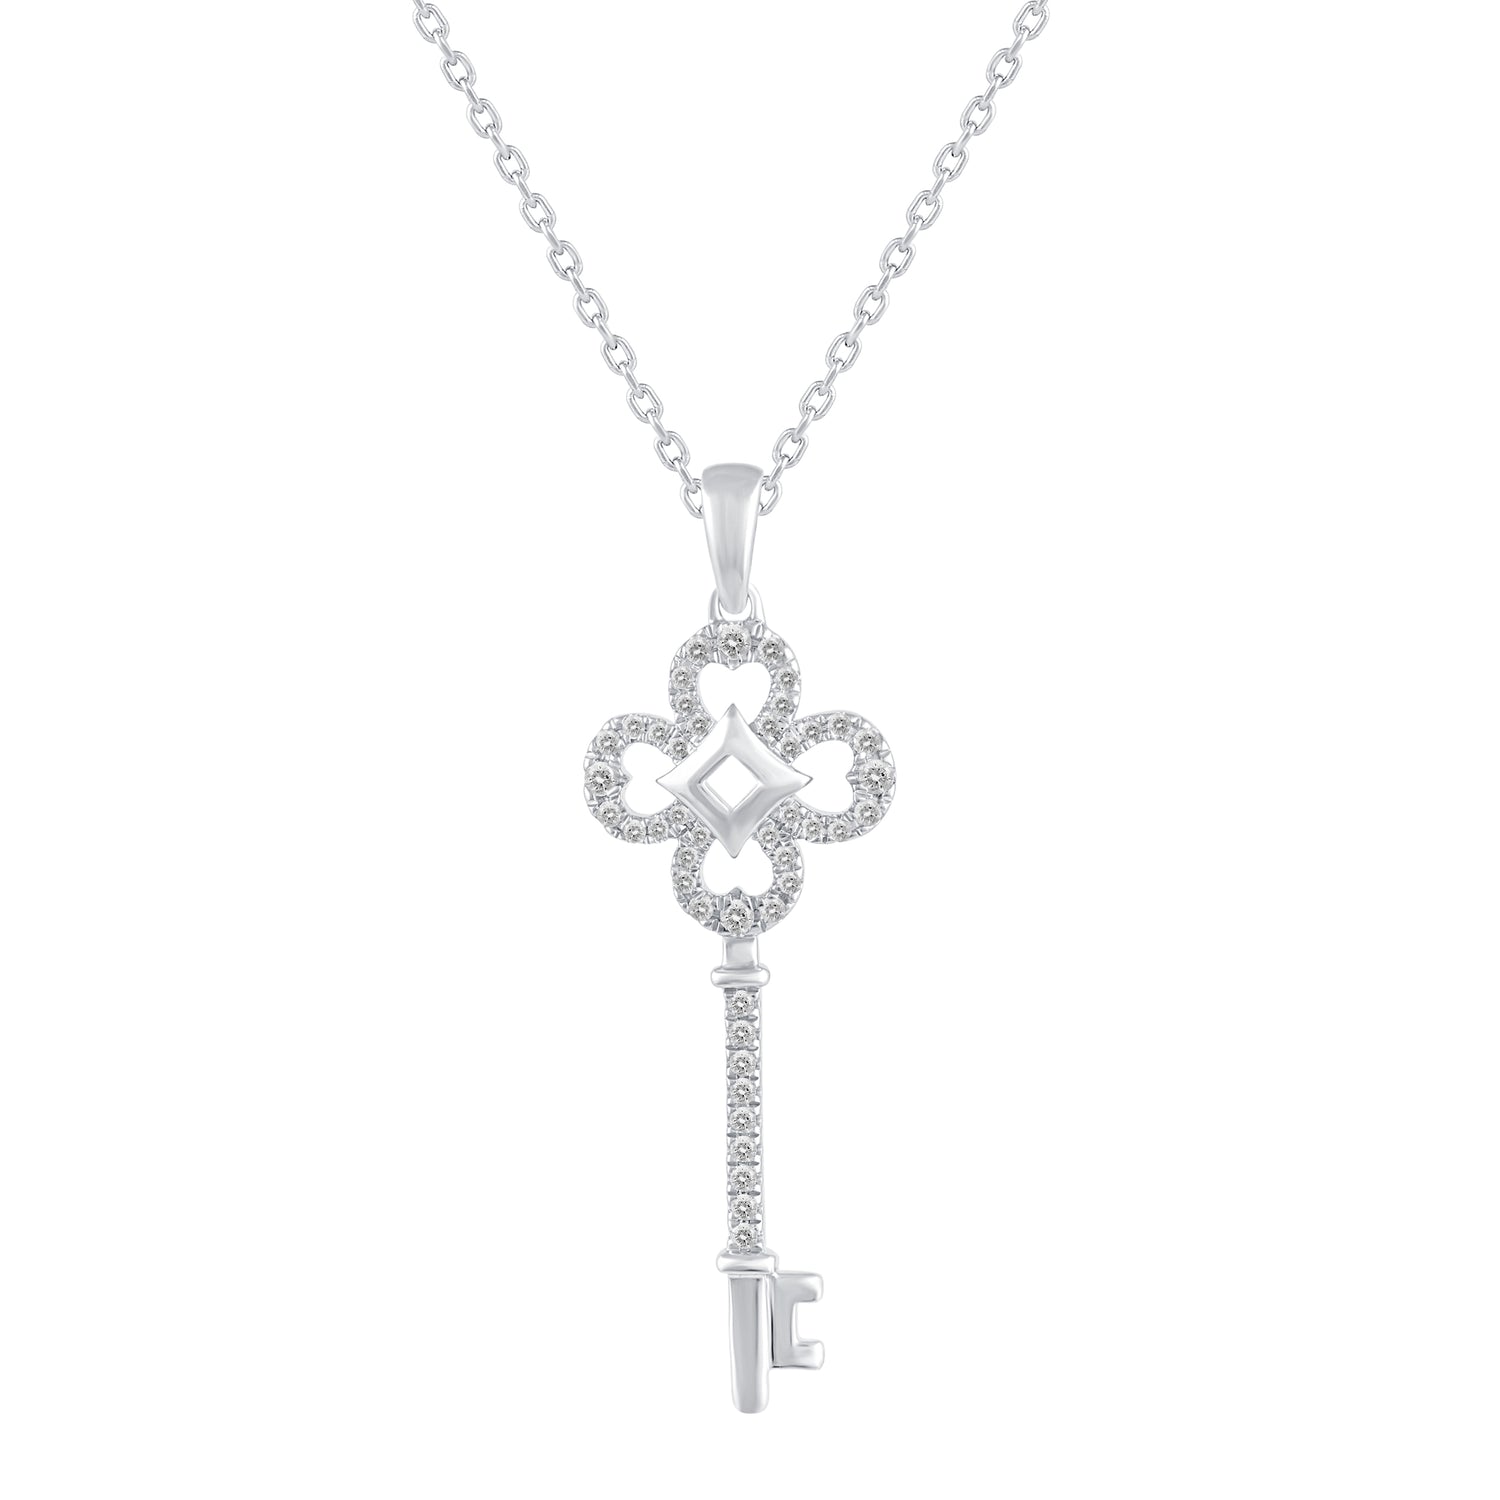 1/5 Cttw Diamond Four Leaf Clover Key Pendant Necklace set in 925 Sterling Silver